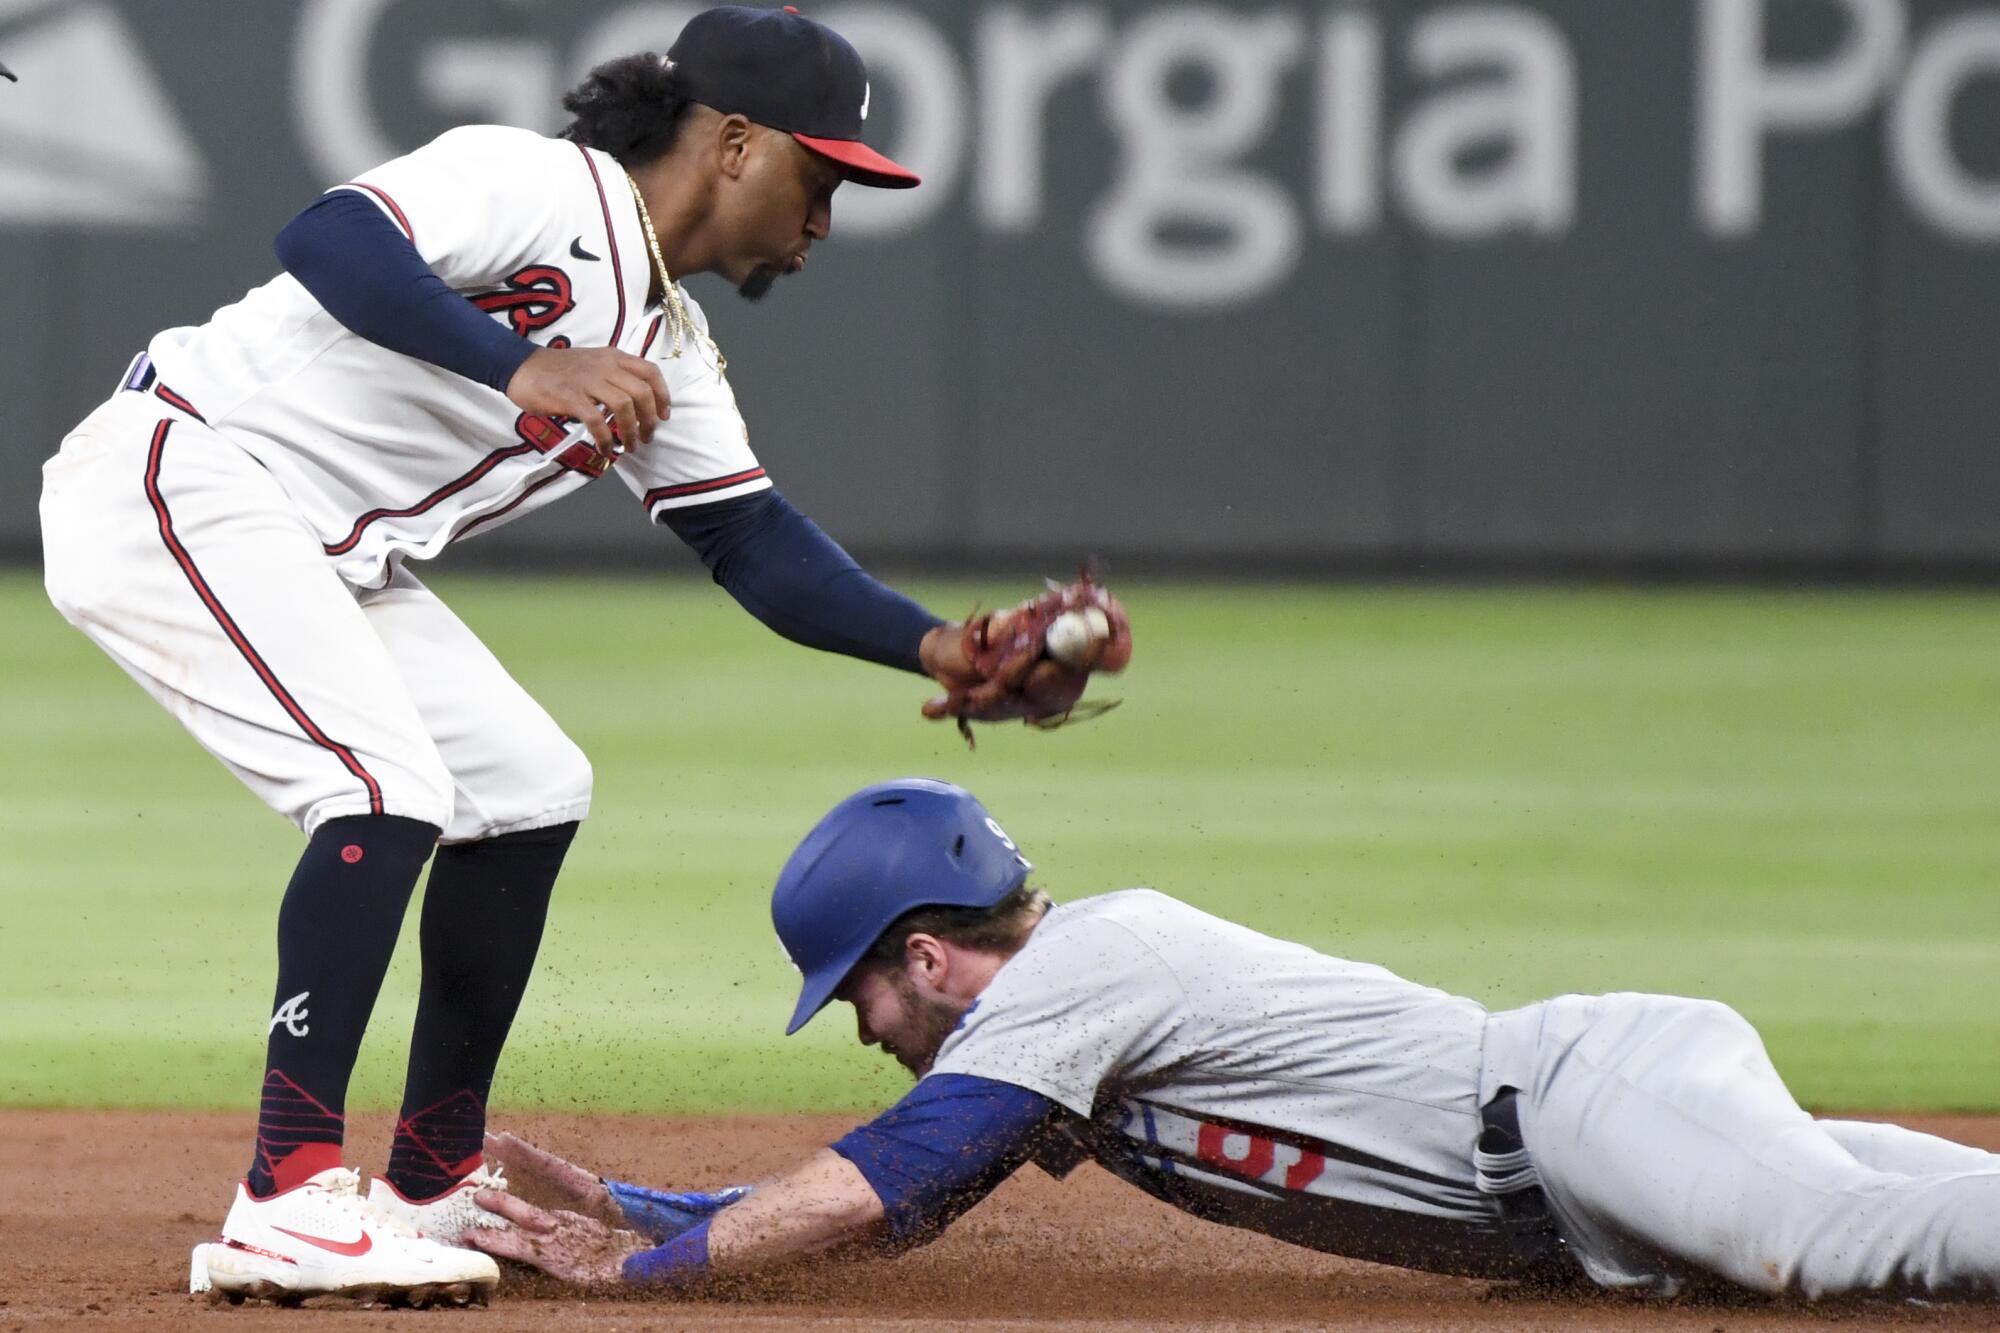 Los Angeles Dodgers' Gavin Lux, right, steals second base ahead of the tag by Atlanta Braves second baseman Ozzie Albies